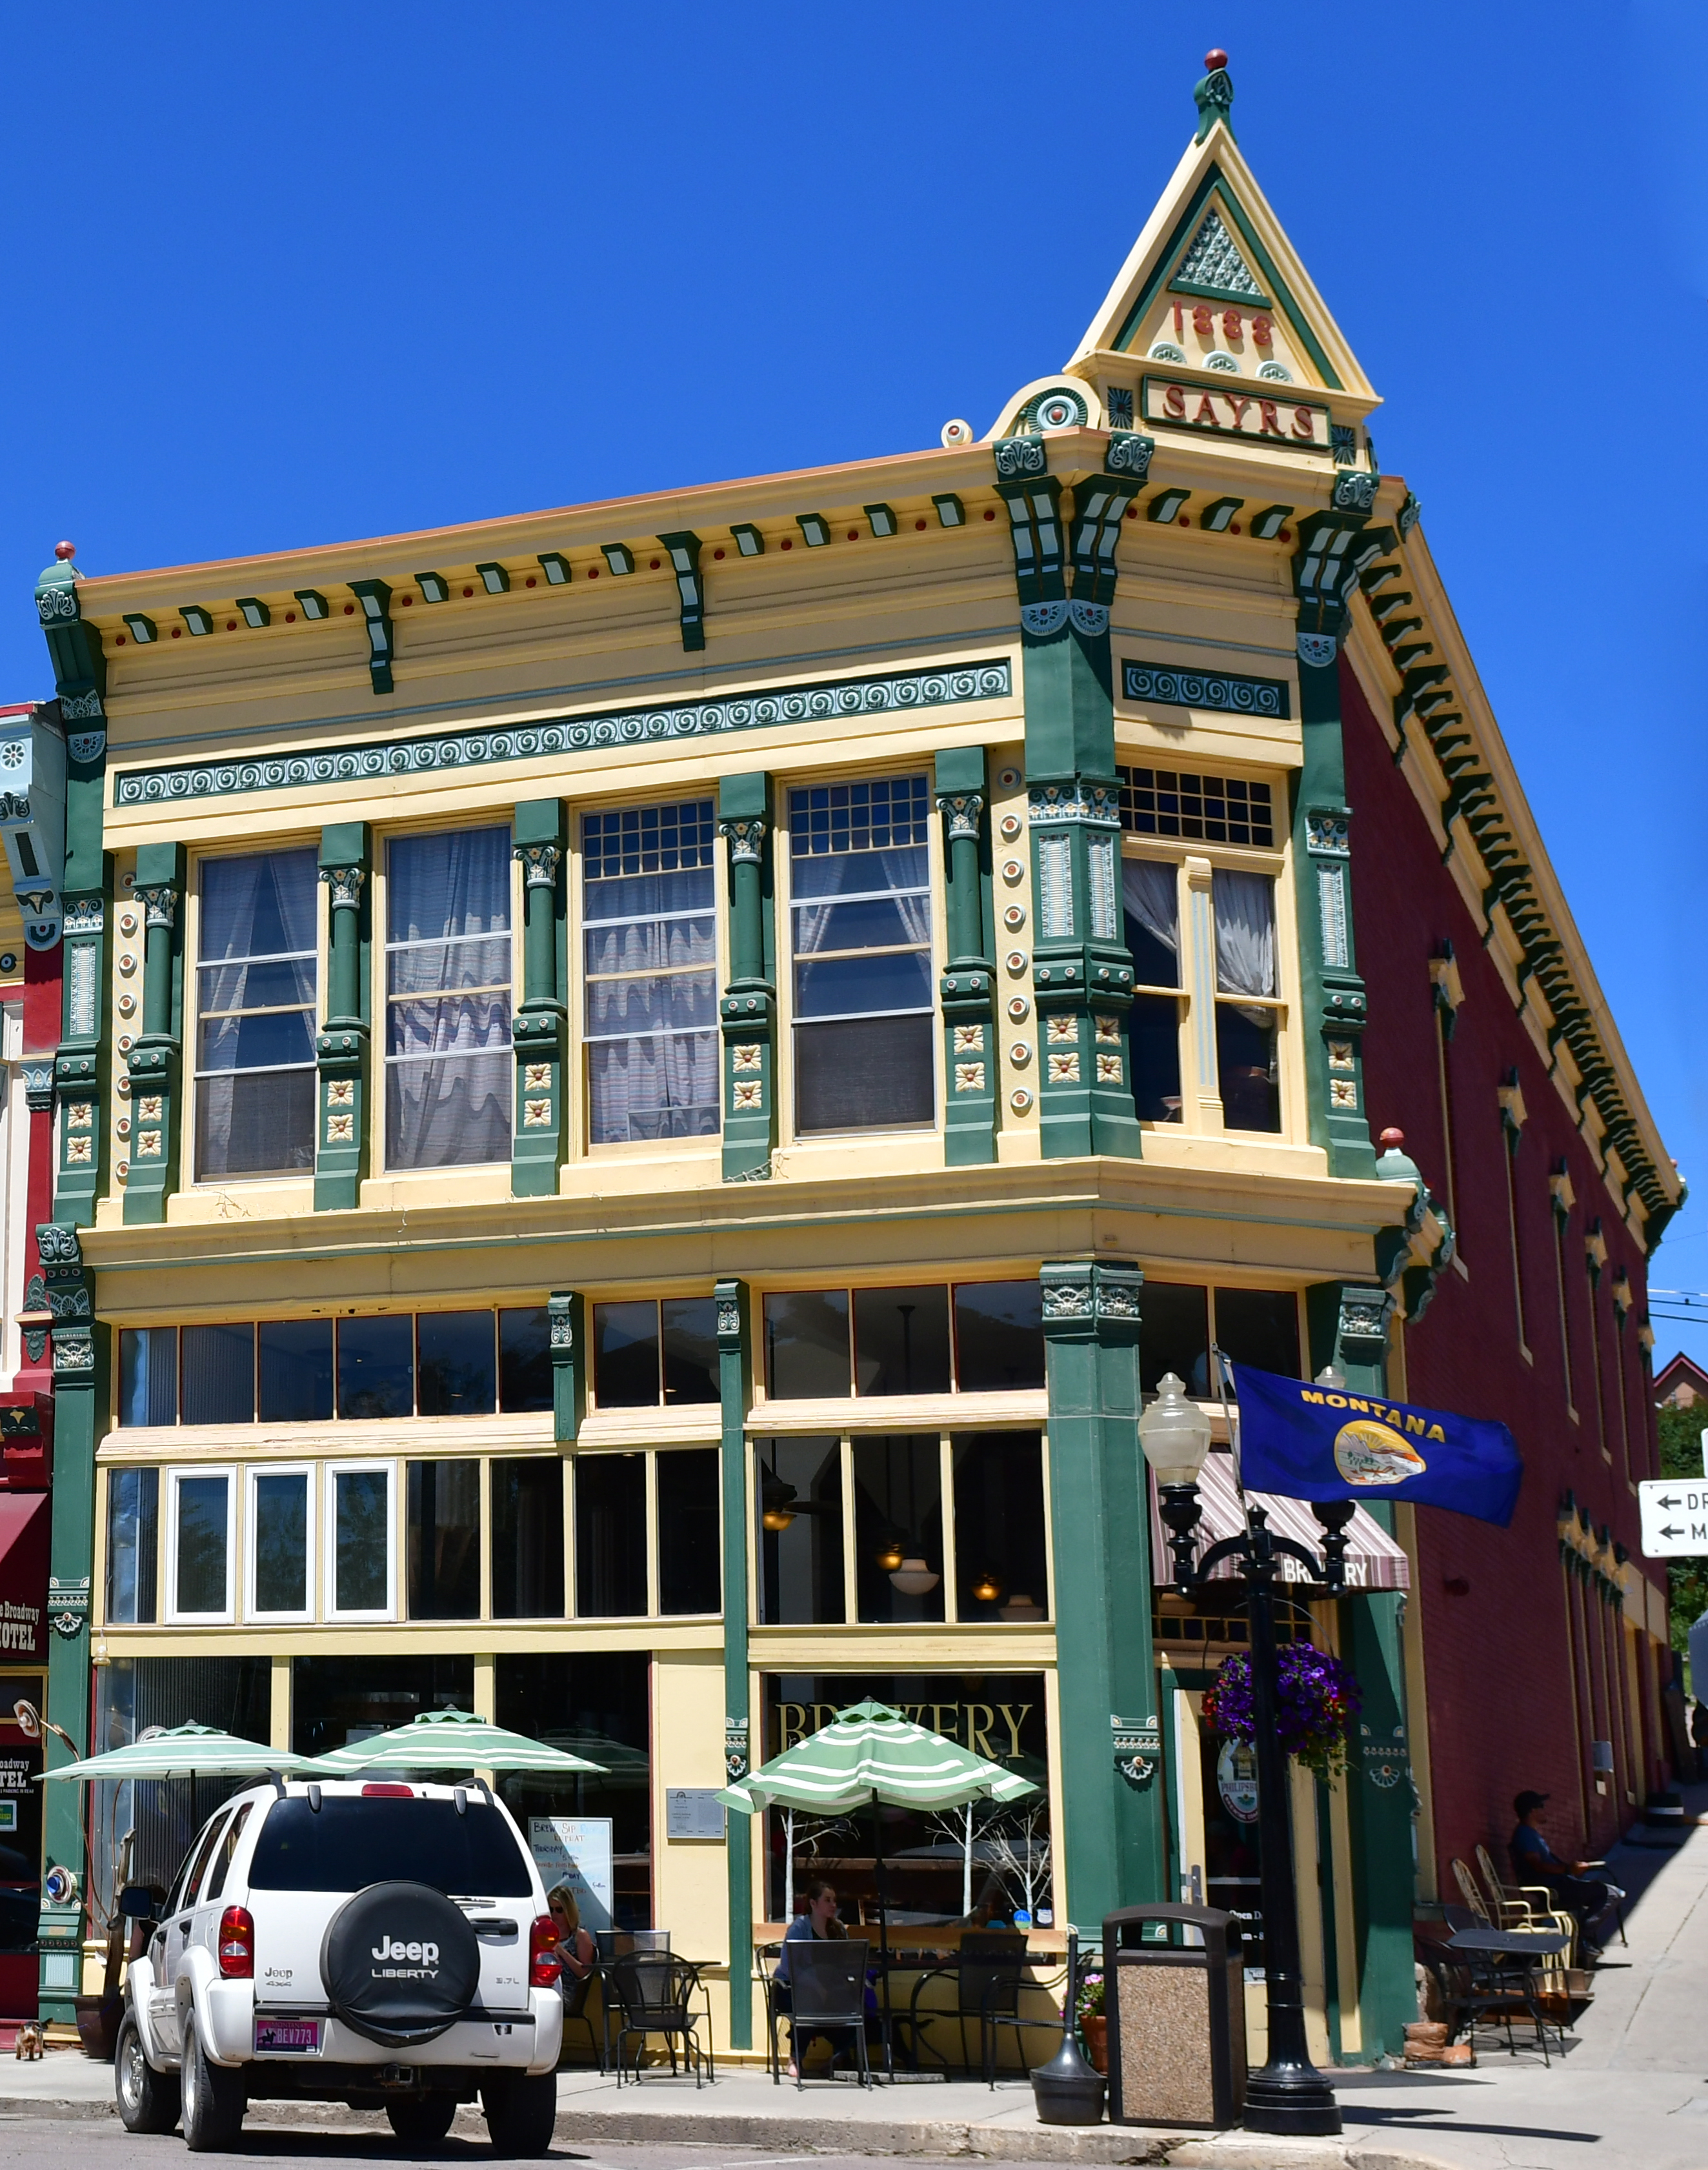 The historic Sayrs Building was built in 1888 and was originally called Hyde Block.